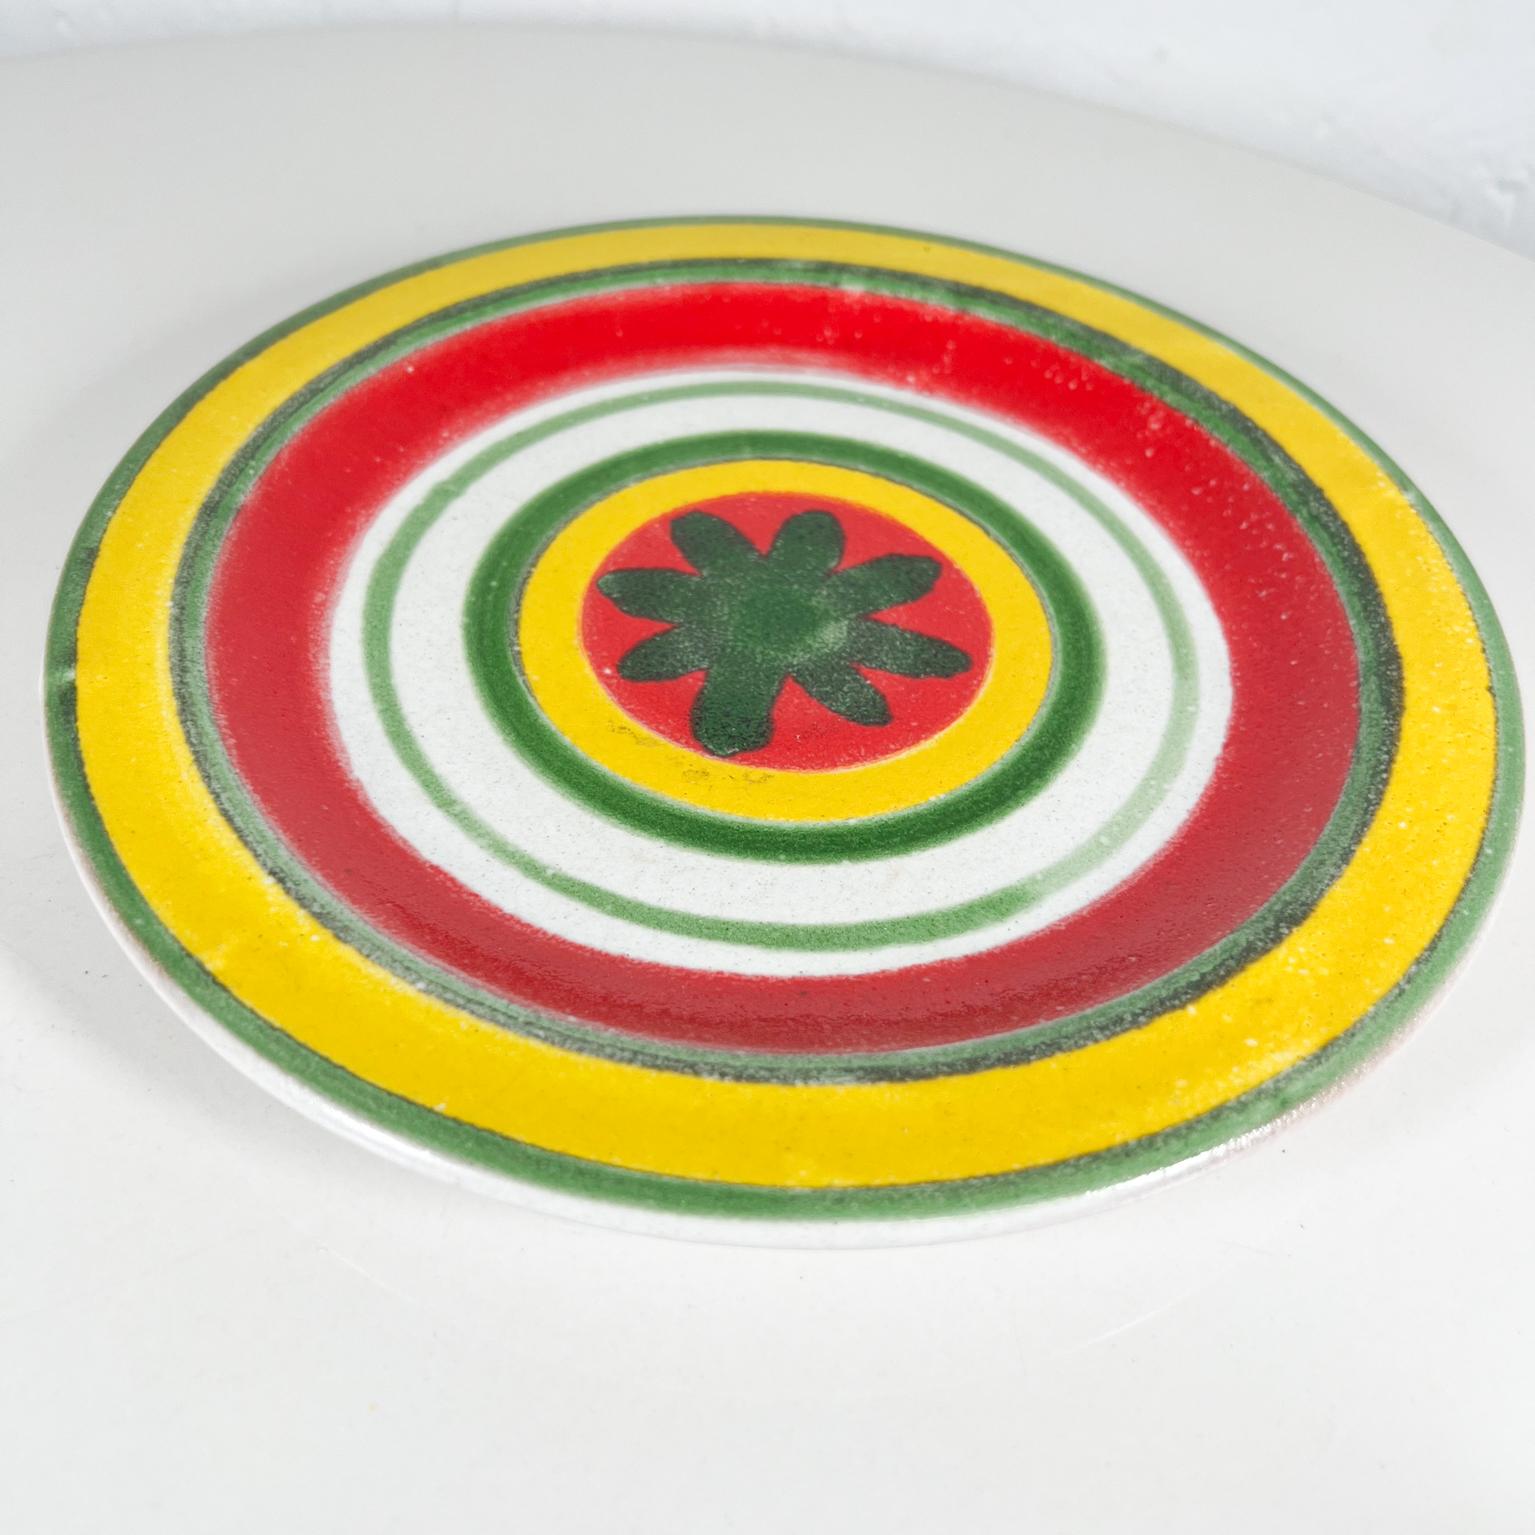 Mid-20th Century 1960s Desimone Ceramic Pottery Italy Art Plate Yellow Red Green Hand Painted